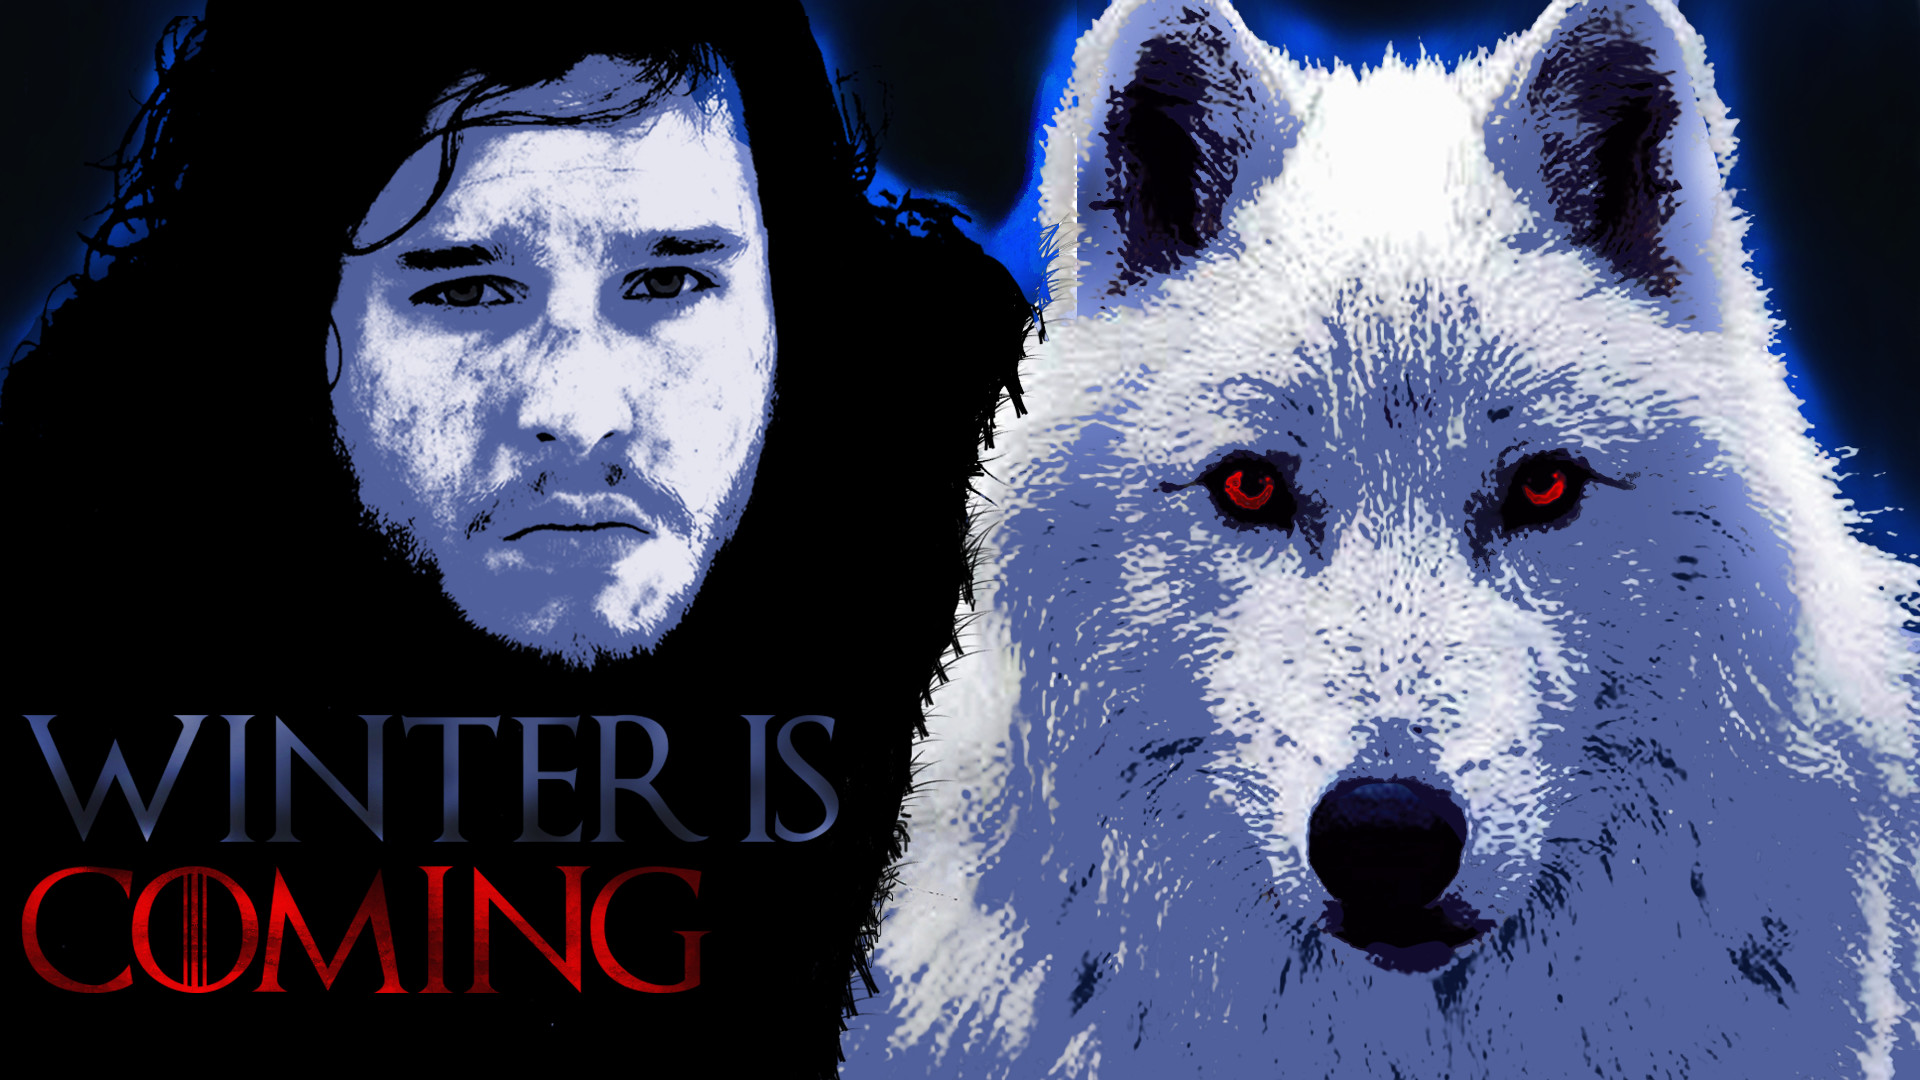 John Snow and Ghost